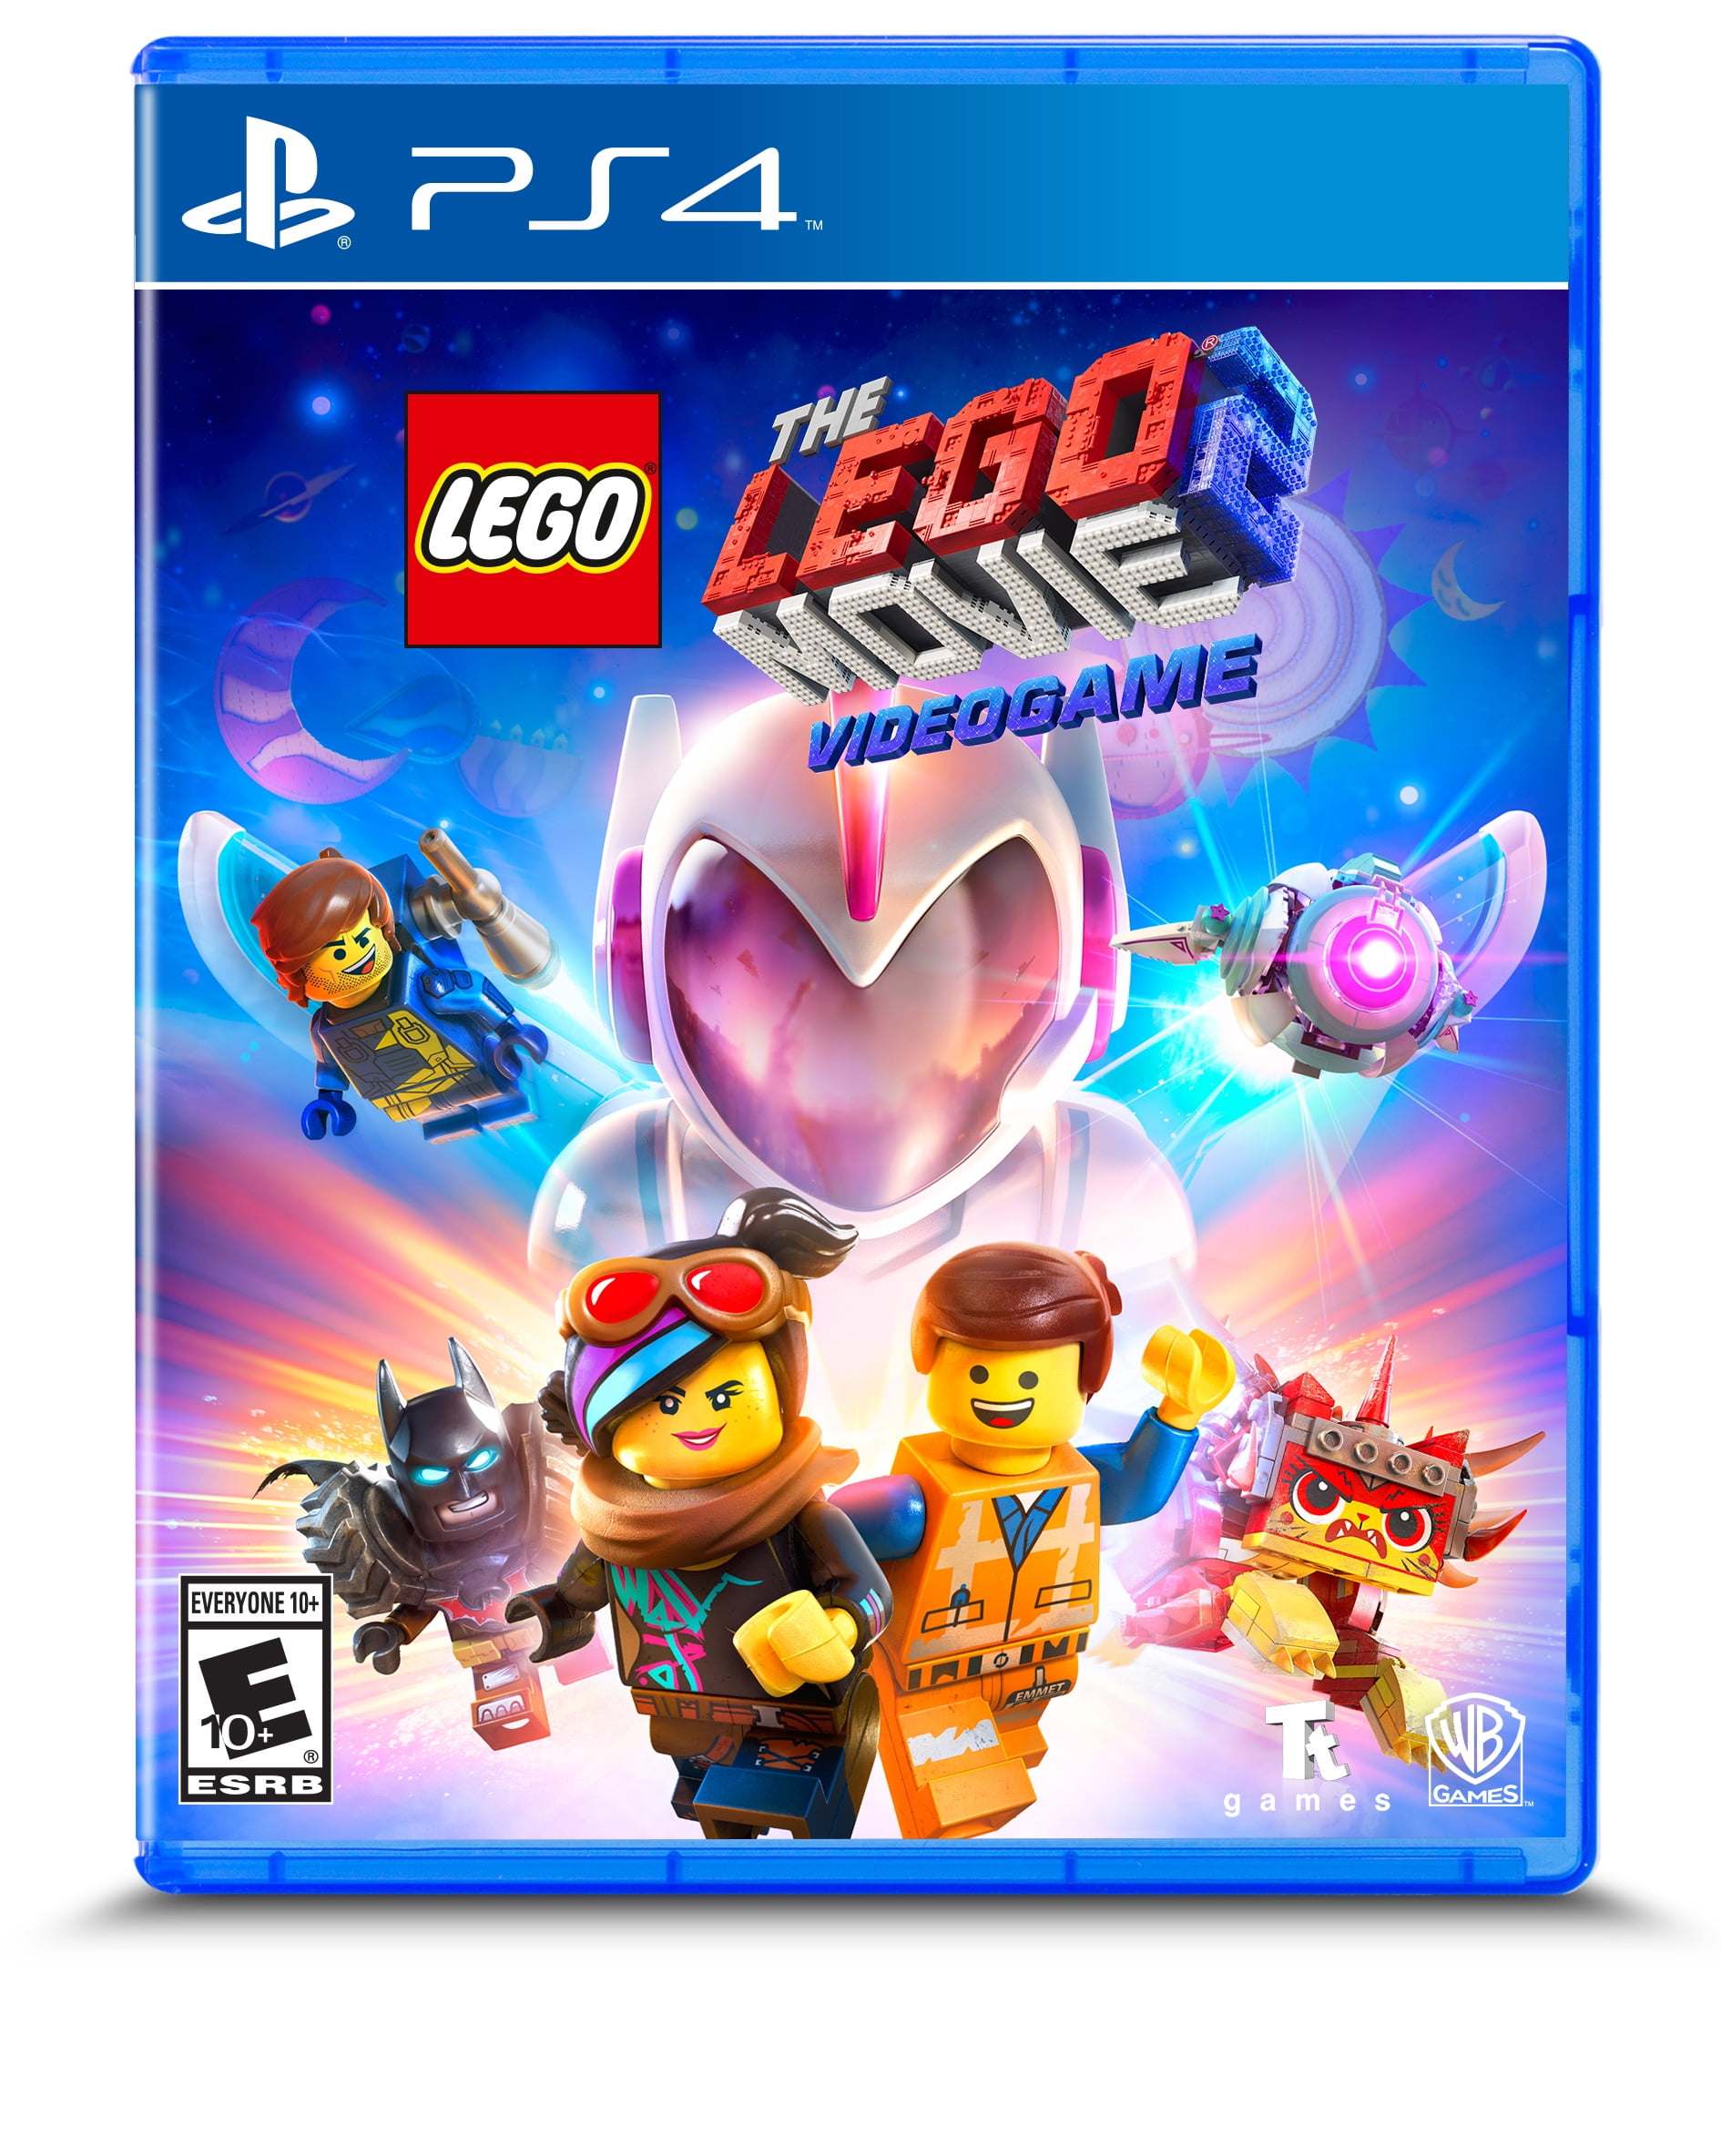 The LEGO Movie Videogame - IGN